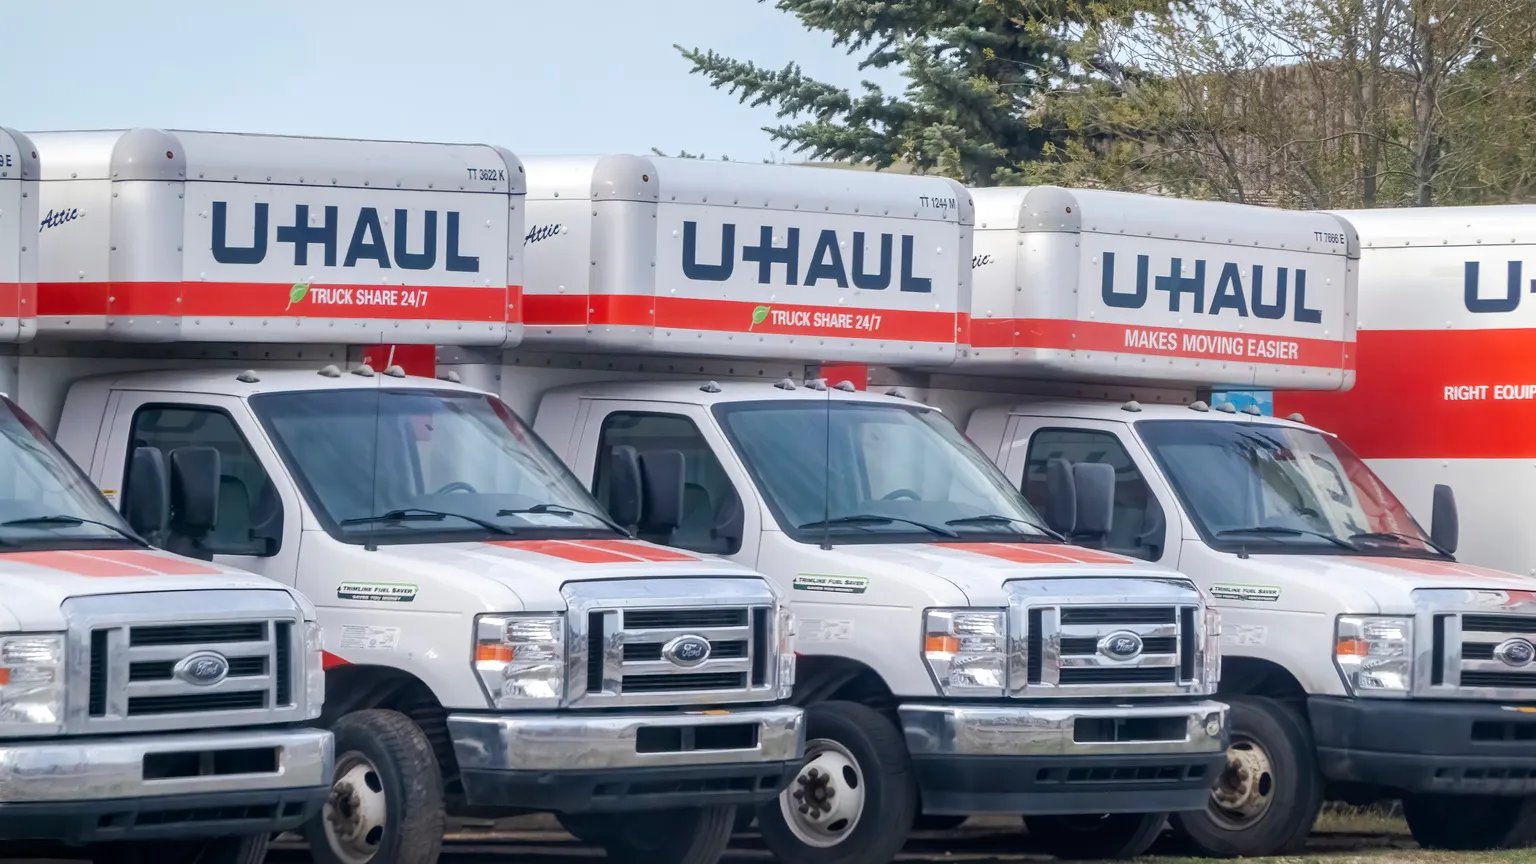 How Much Does a U-Haul Rental Cost?